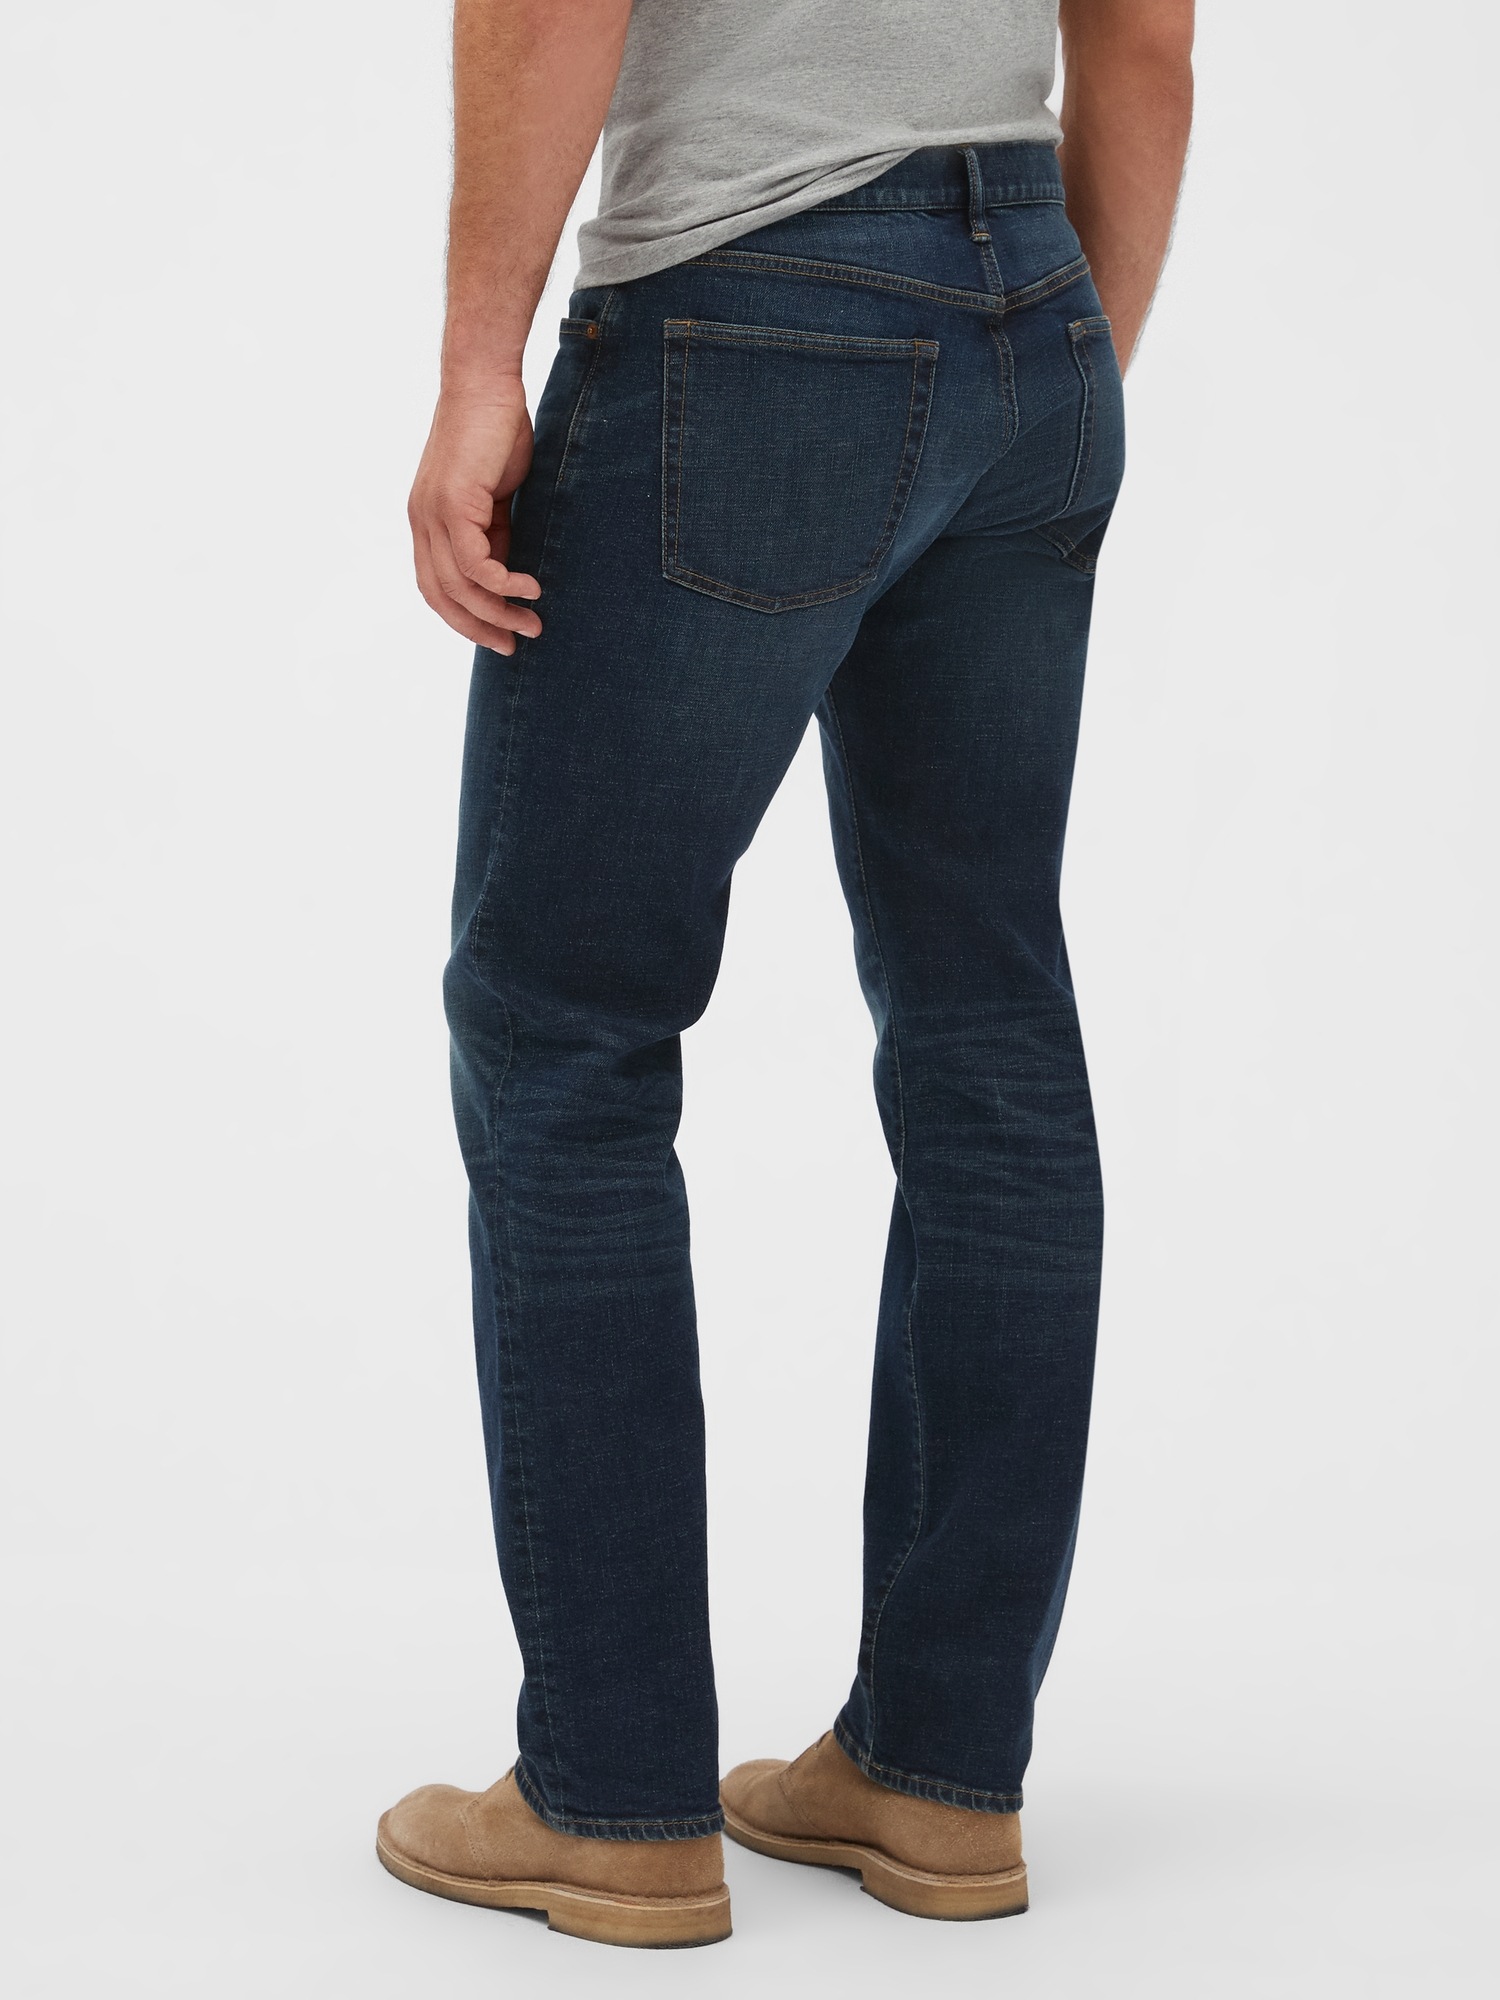 Straight Gapflex Jeans with Washwell™ | Gap Factory